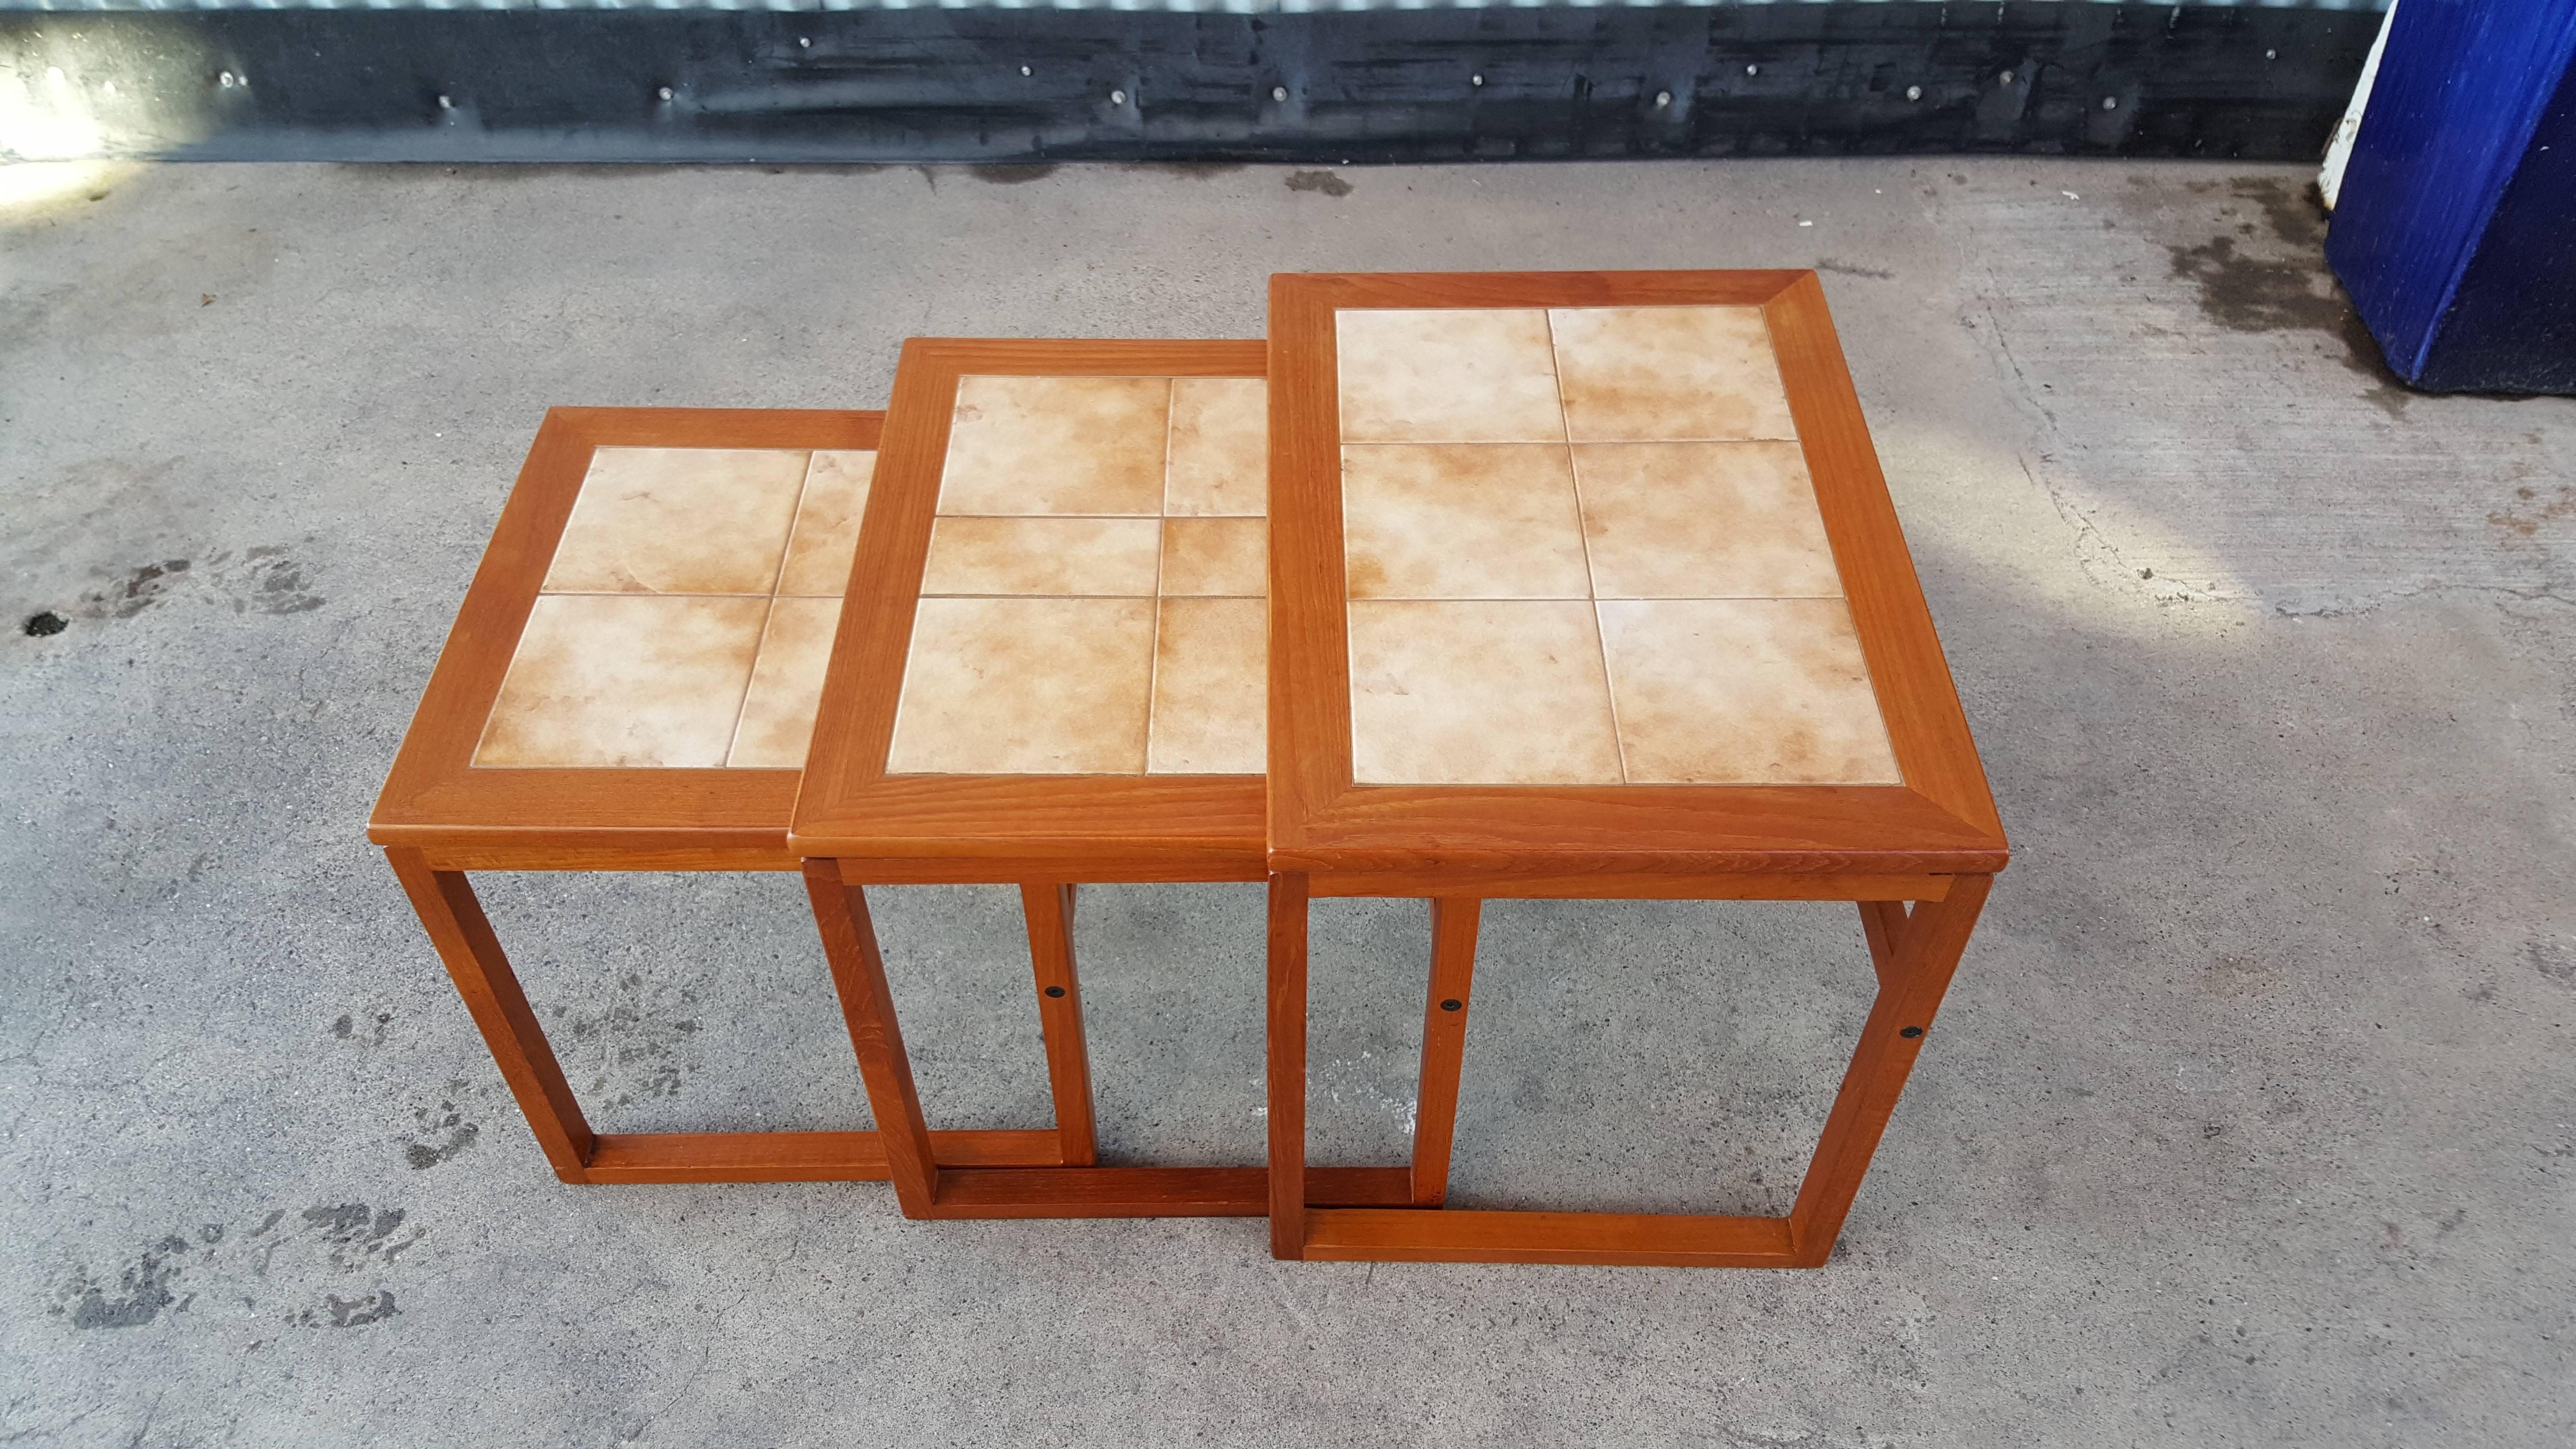 Danish Modern Teak and Tile Nesting Tables In Excellent Condition For Sale In Fulton, CA